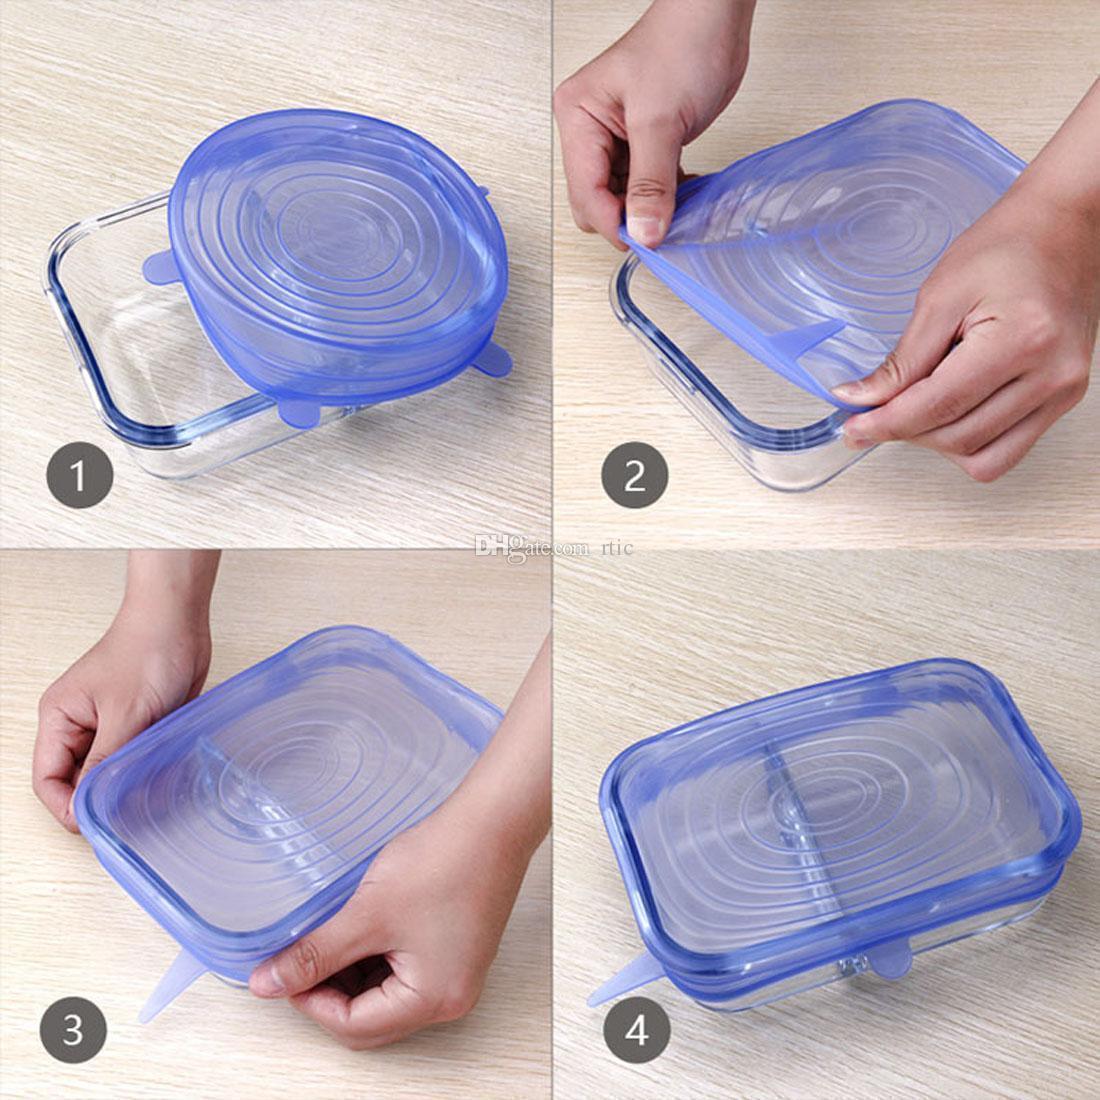 Air Tight Silicone Food Safety Lids (Set of 6)